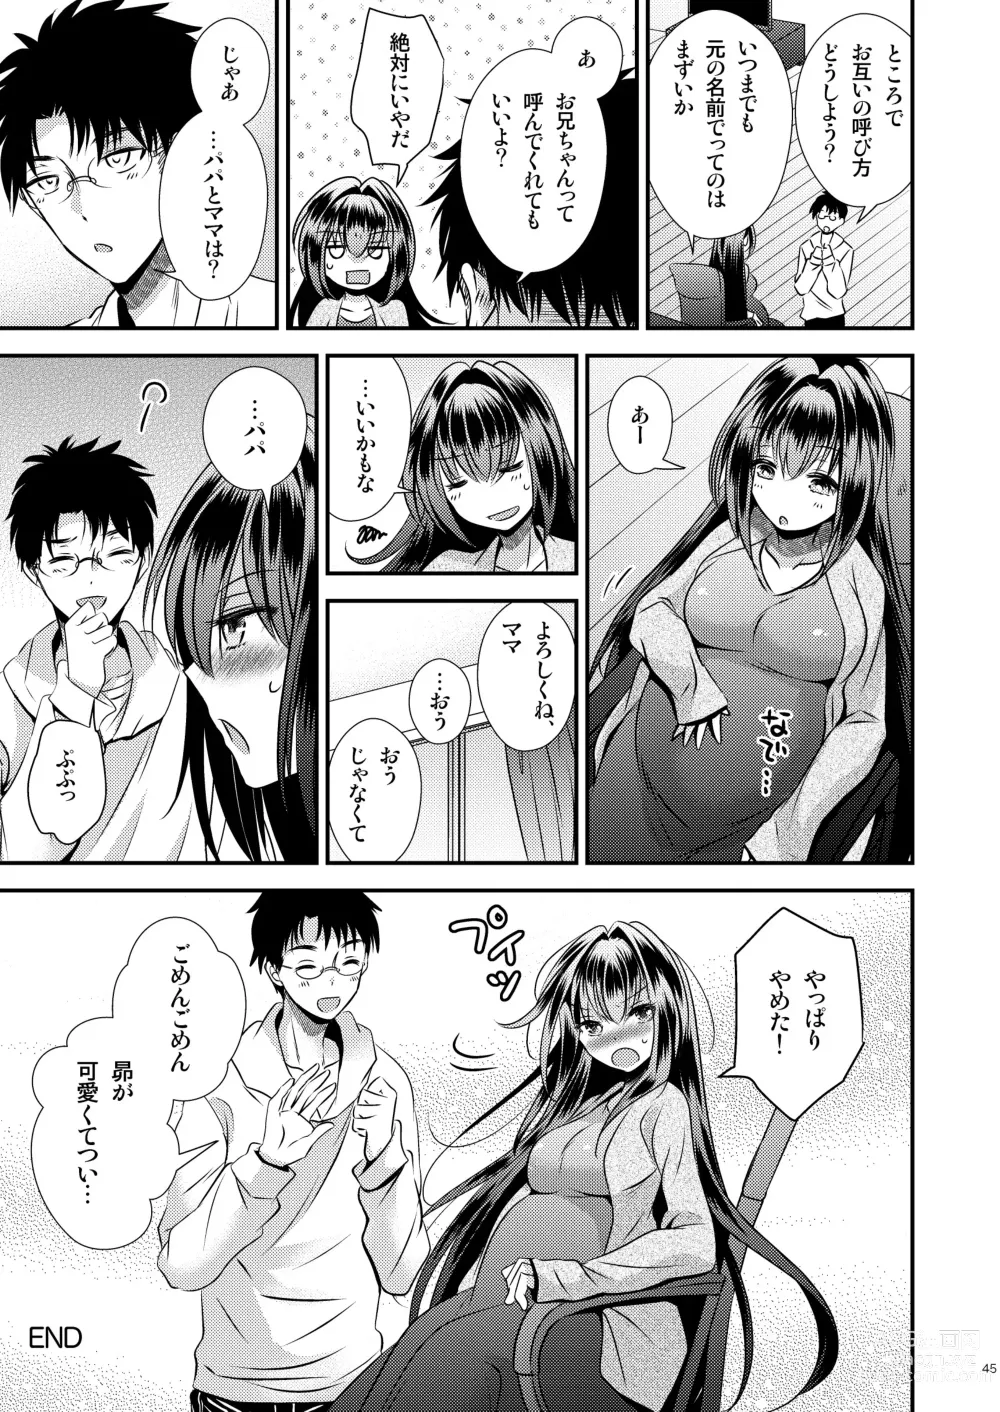 Page 45 of doujinshi 性欲処理に使っていた妹と入れ替わった兄